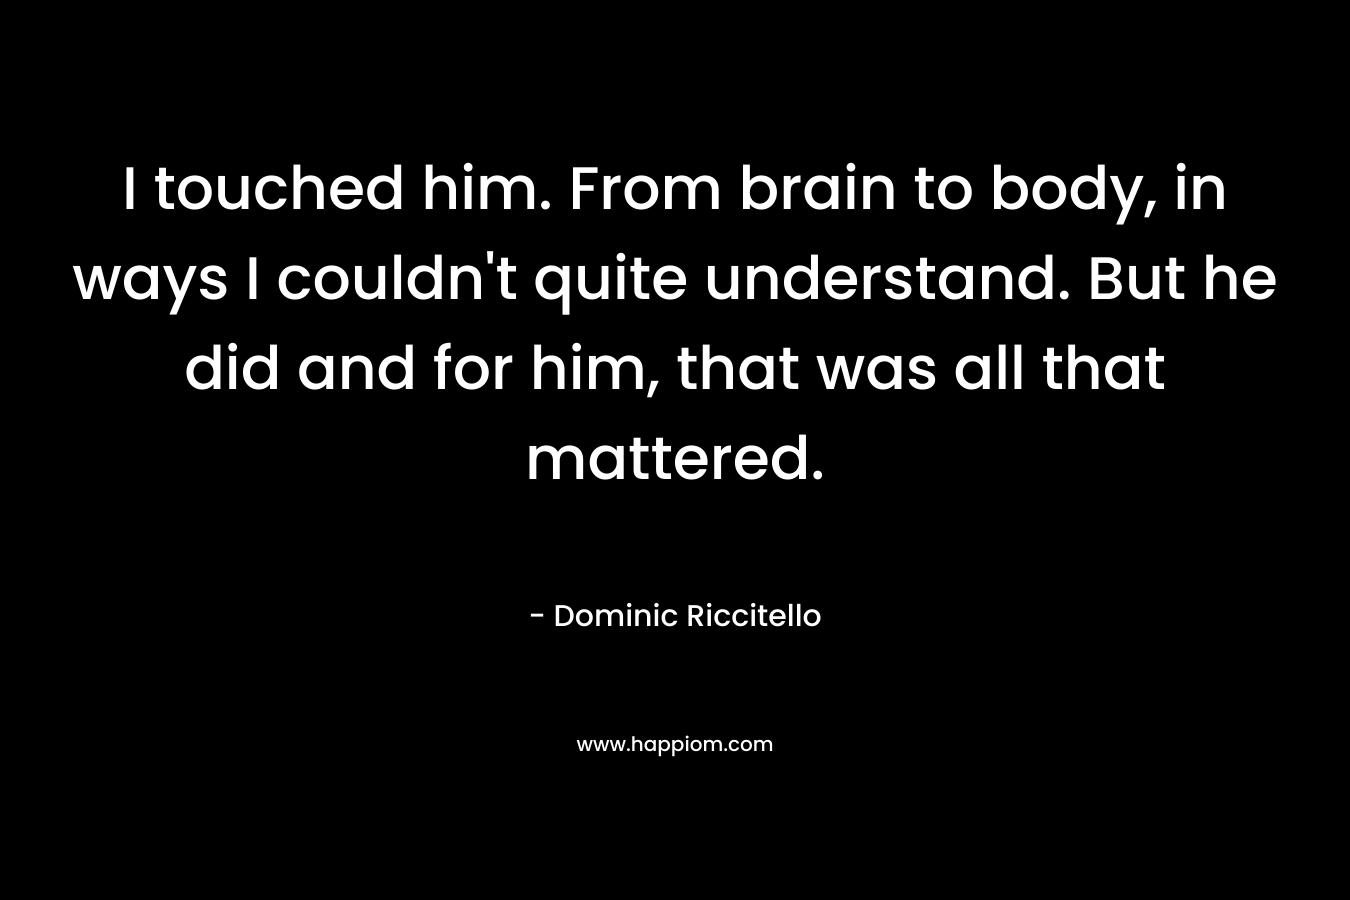 I touched him. From brain to body, in ways I couldn’t quite understand. But he did and for him, that was all that mattered. – Dominic Riccitello